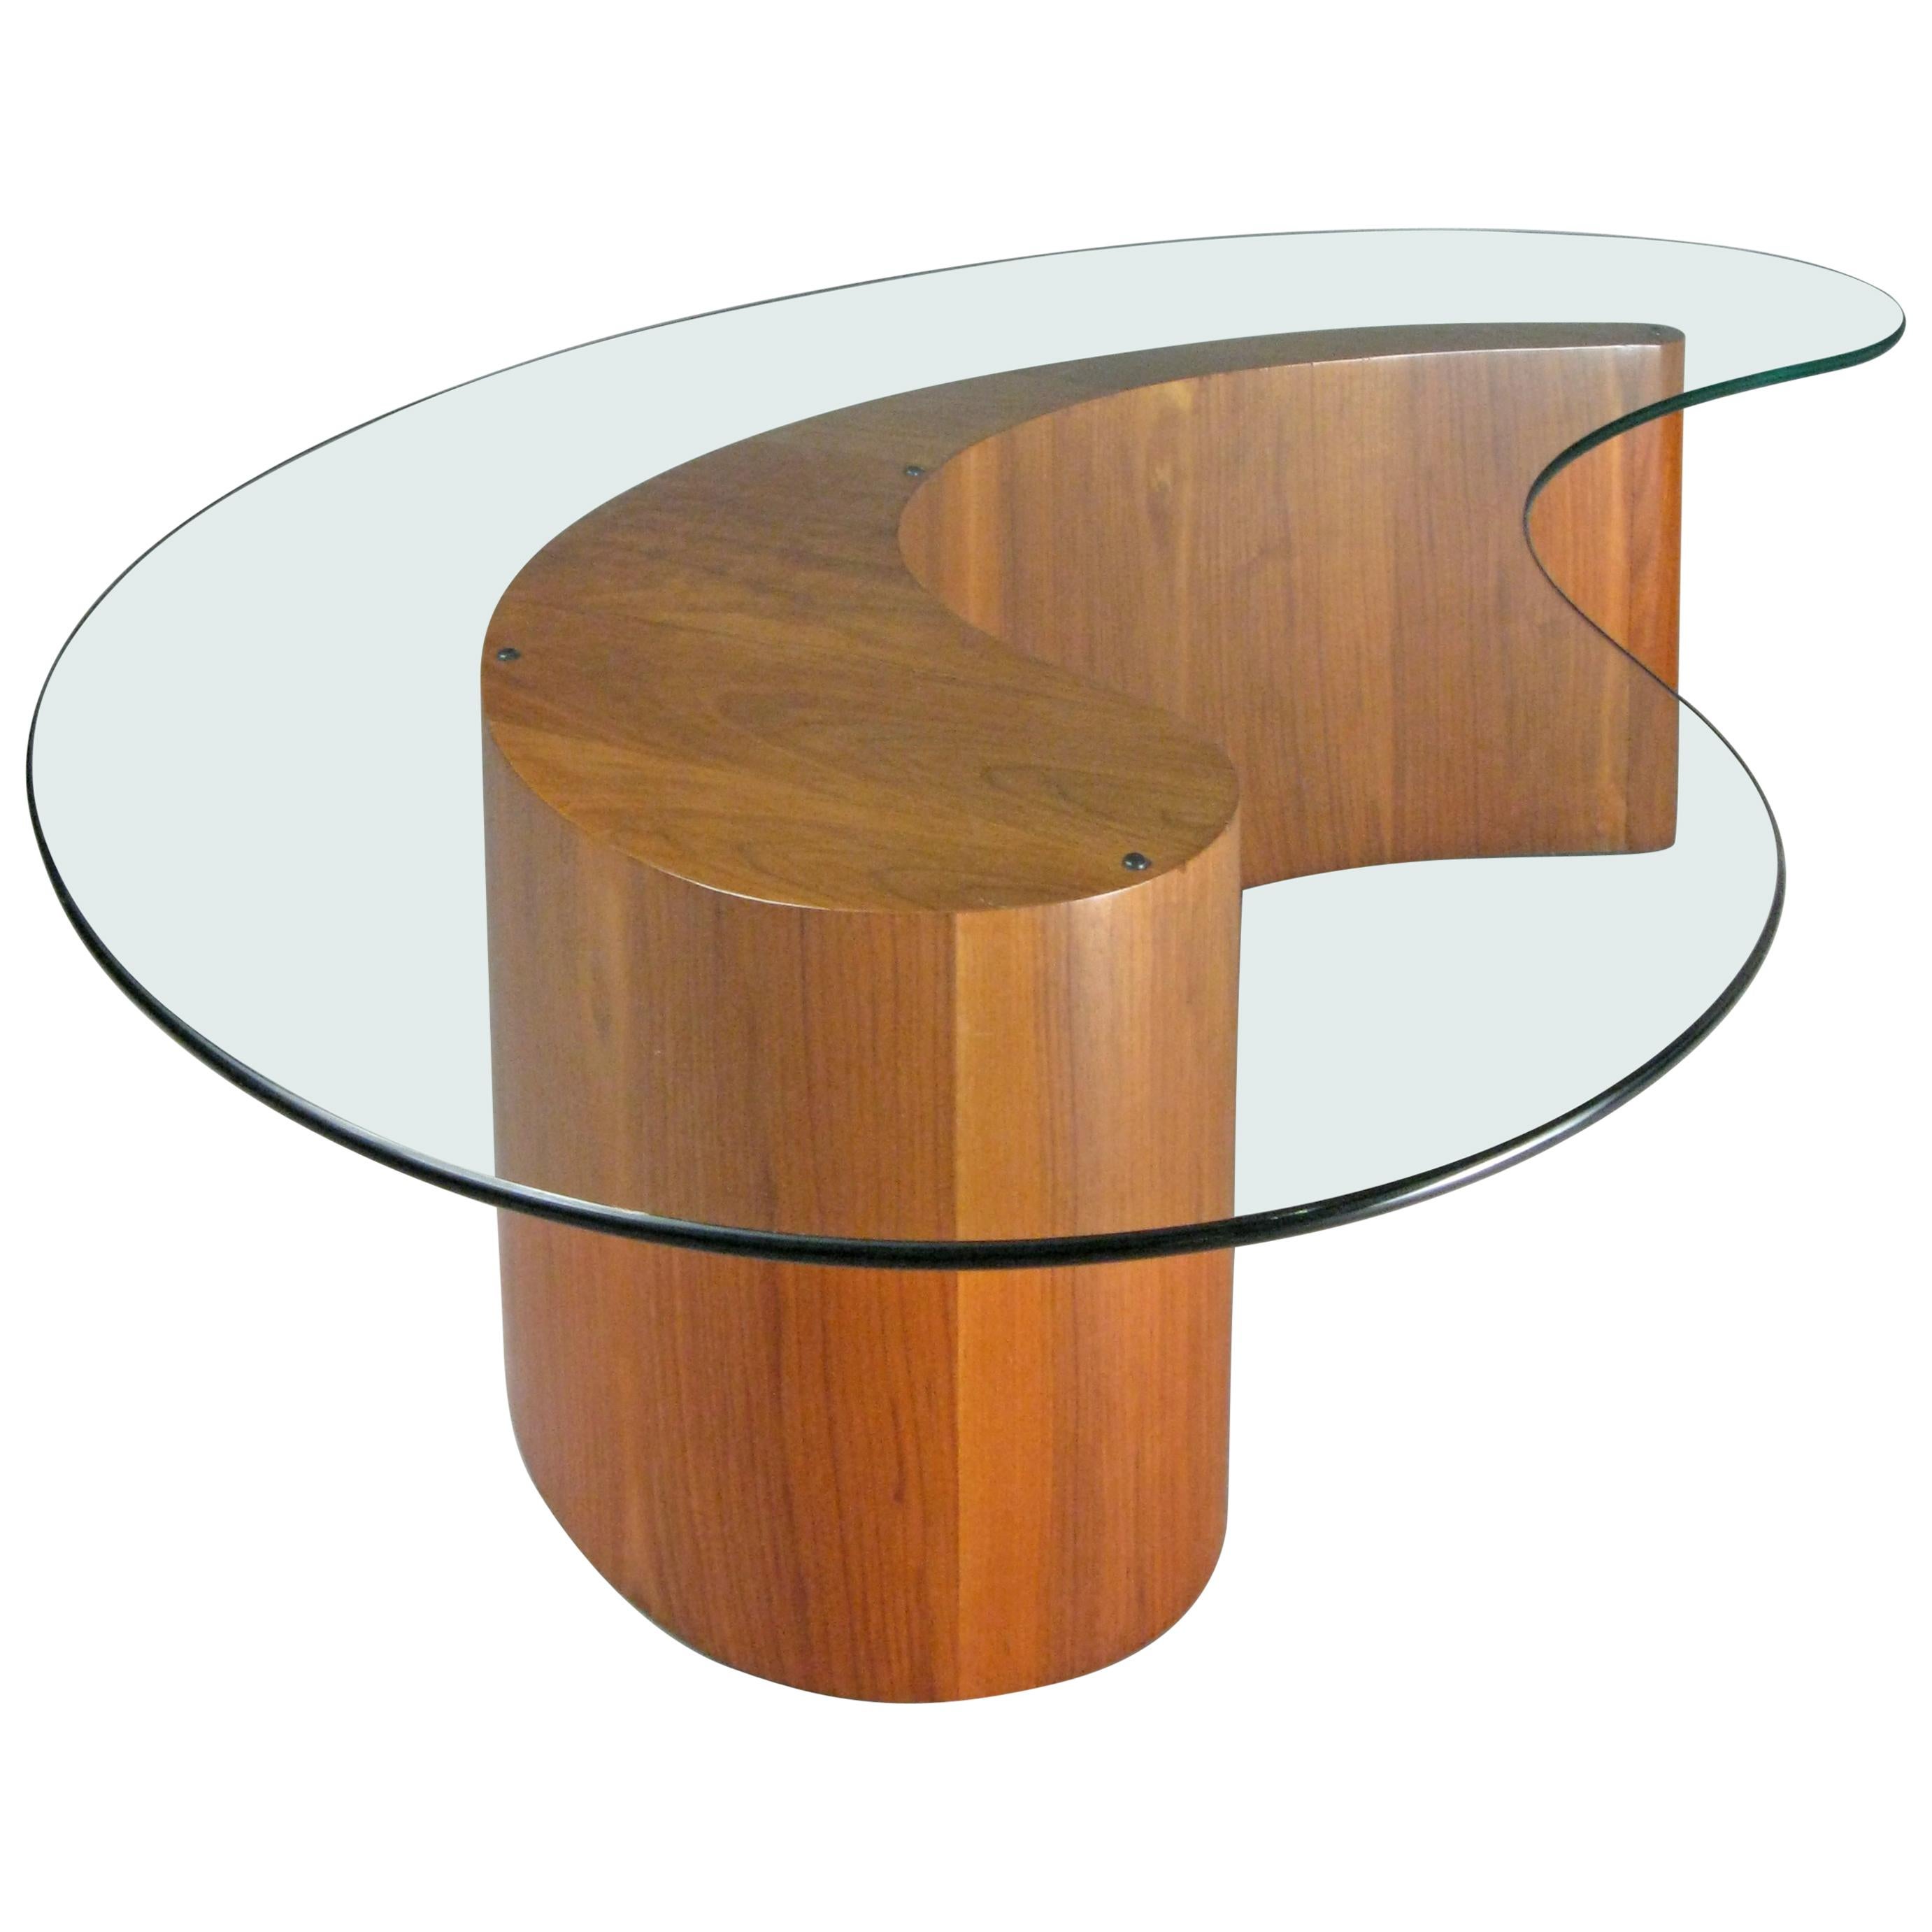 Walnut and Glass Apostrophe Table by Vladimir Kagan